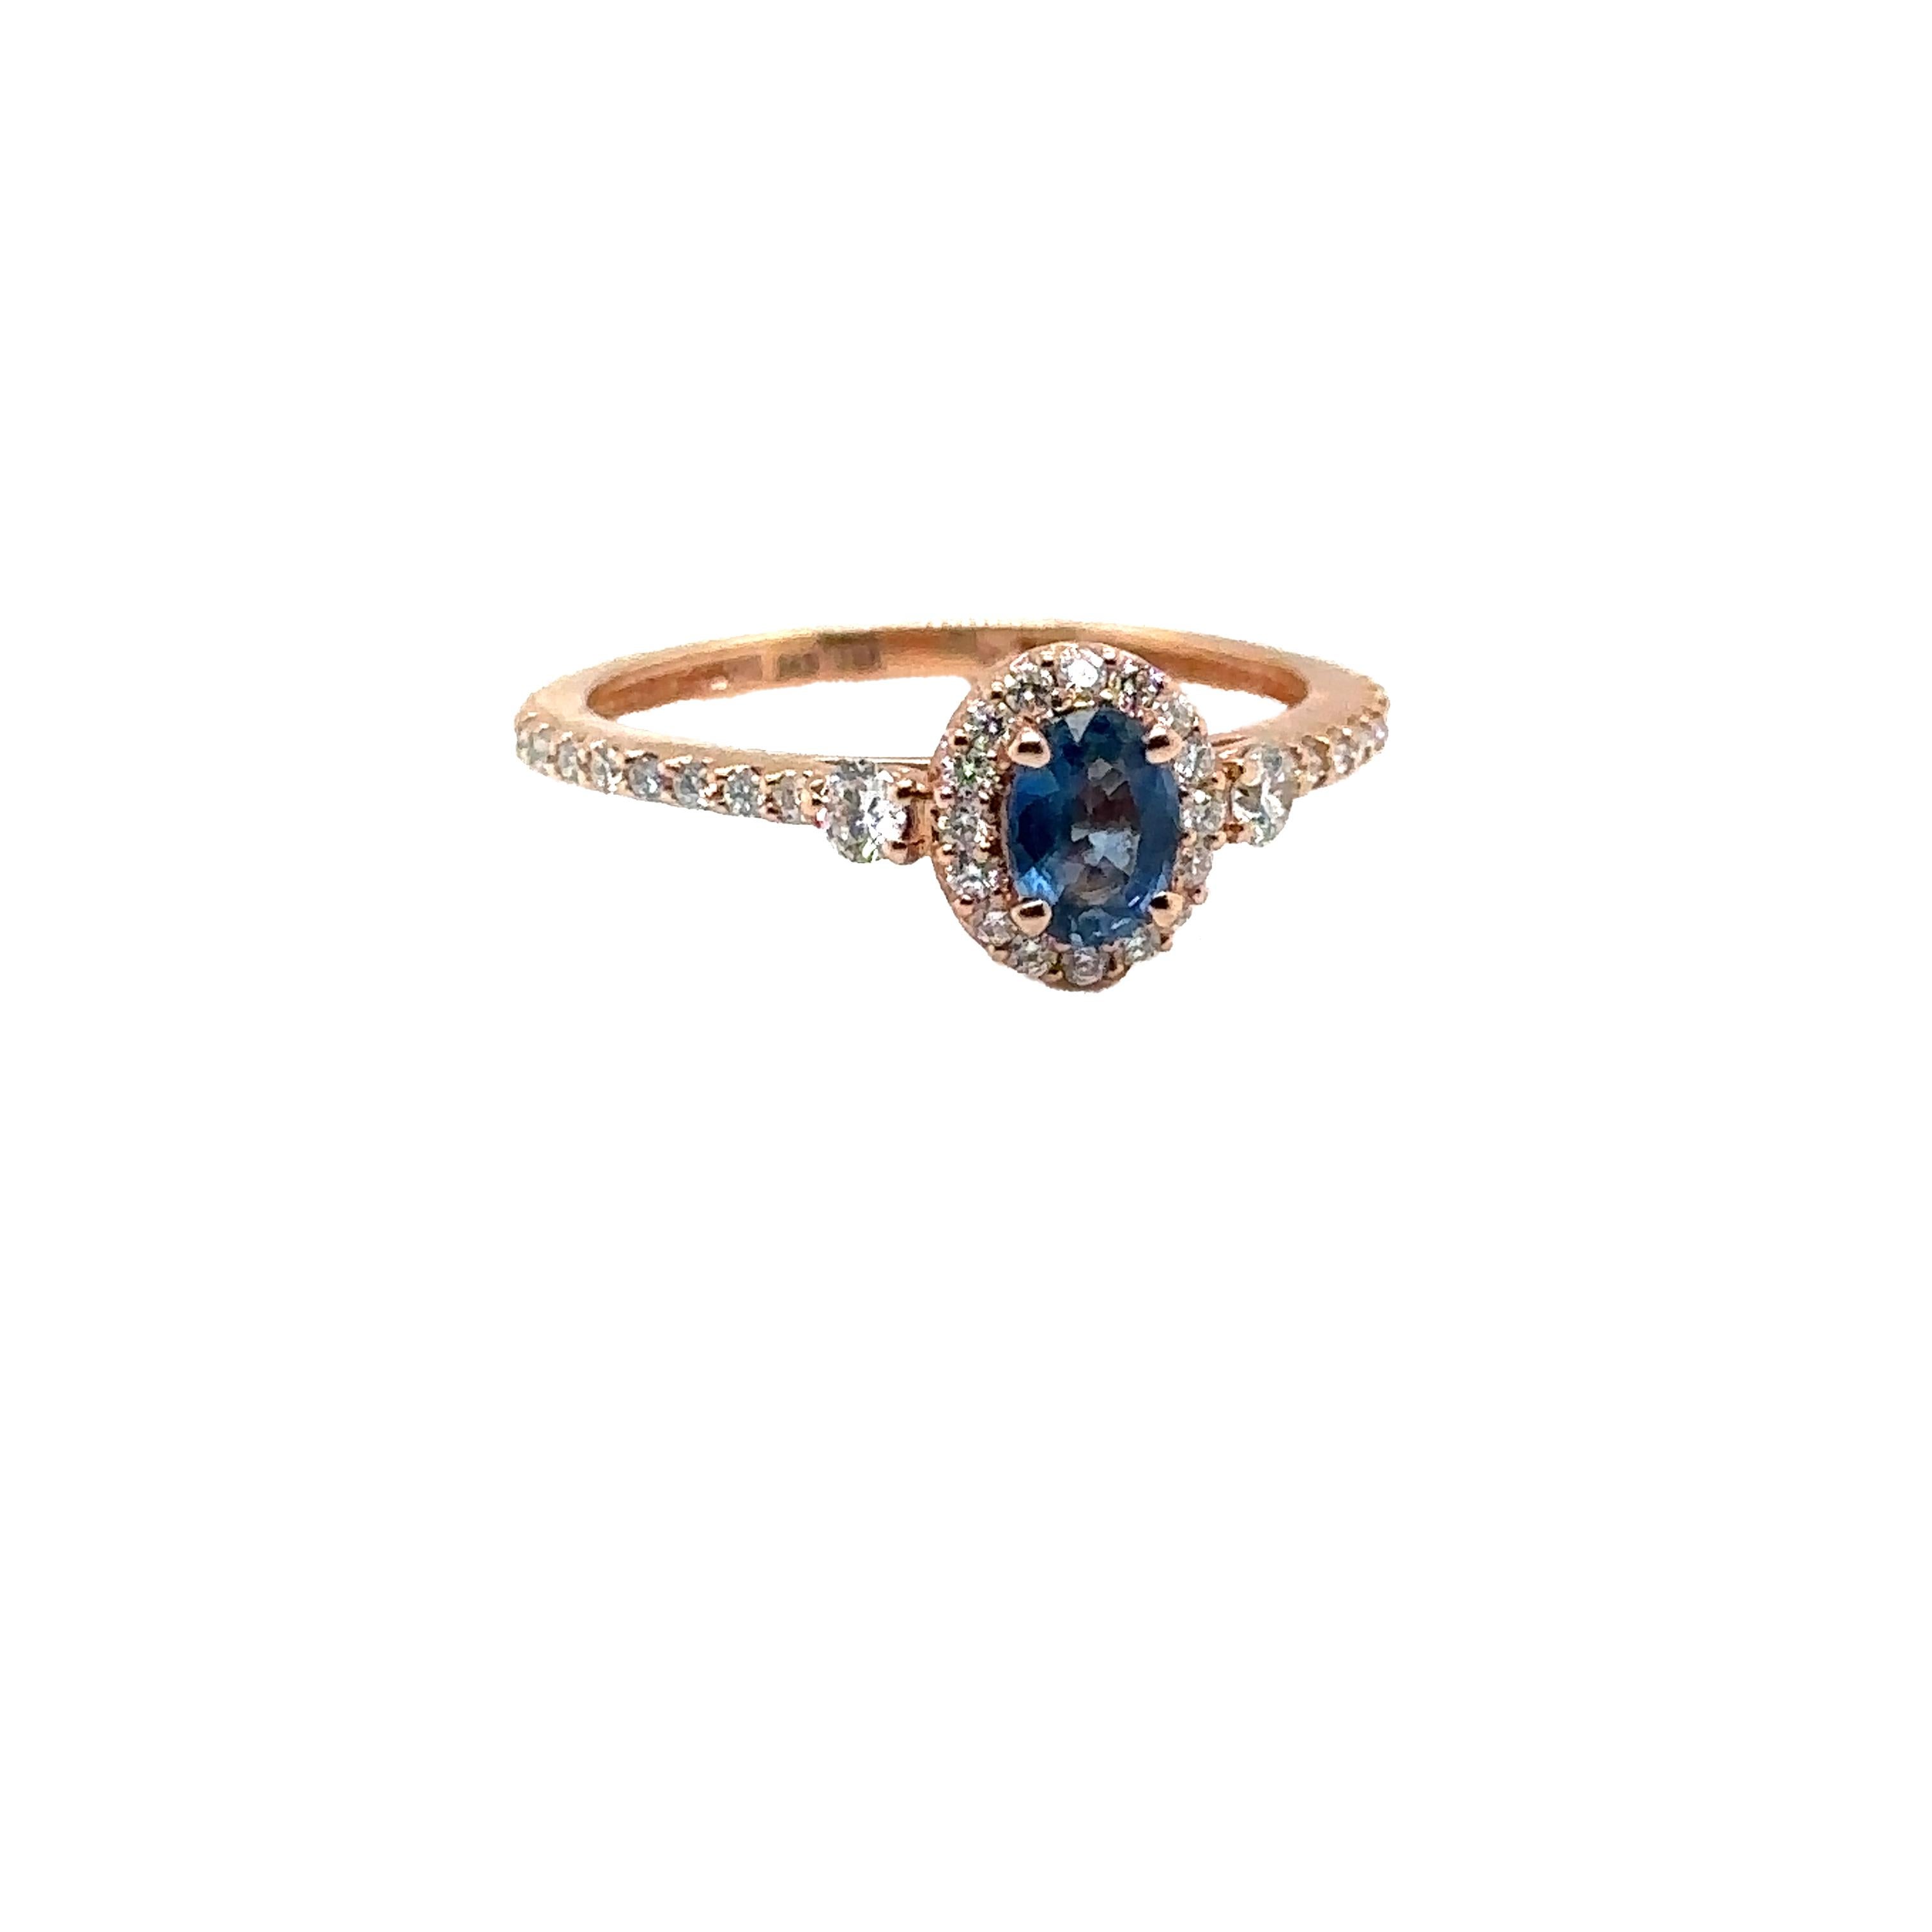 14K ROSE GOLD OVAL SAPPHIRE RING with DIAMONDS
Metal: 14K ROSE GOLD
Diamond Info: GH SI 0.40CT
Stones Info: 6X4 OVAL SAPPHIRE 0.52CT
Total Dia Weight: 0.40 cwt.
Total Stone Weight: 0.52 cwt.
Item Weight: 2.55 gm
Ring Size: 8